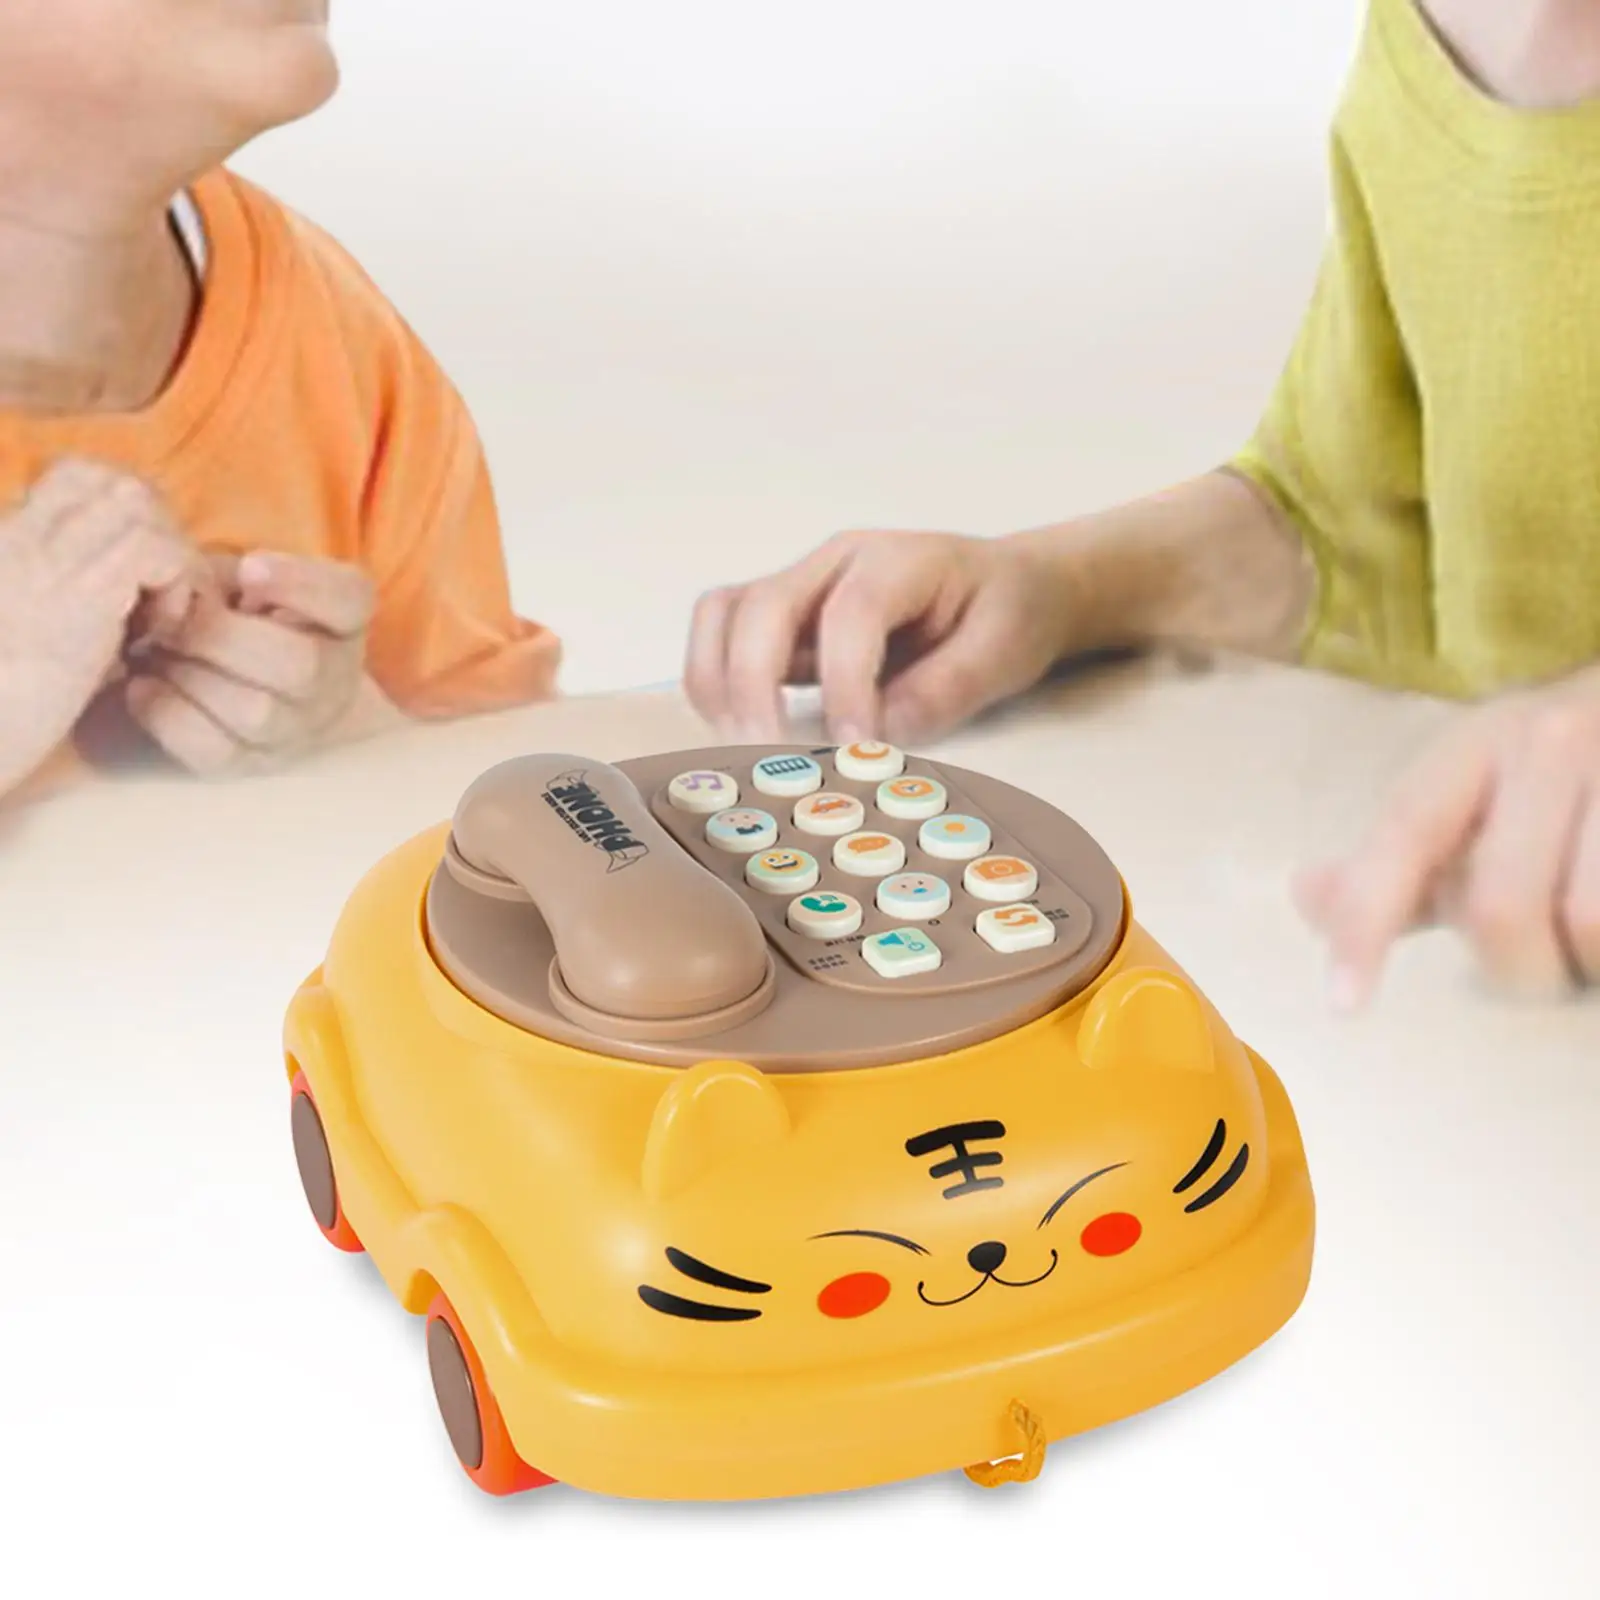 Baby Toy Phone Pretend Phone Baby Musical Toy Parent Child Interactive Toy for 3 Years Old Girl Creative Gift Boy Children